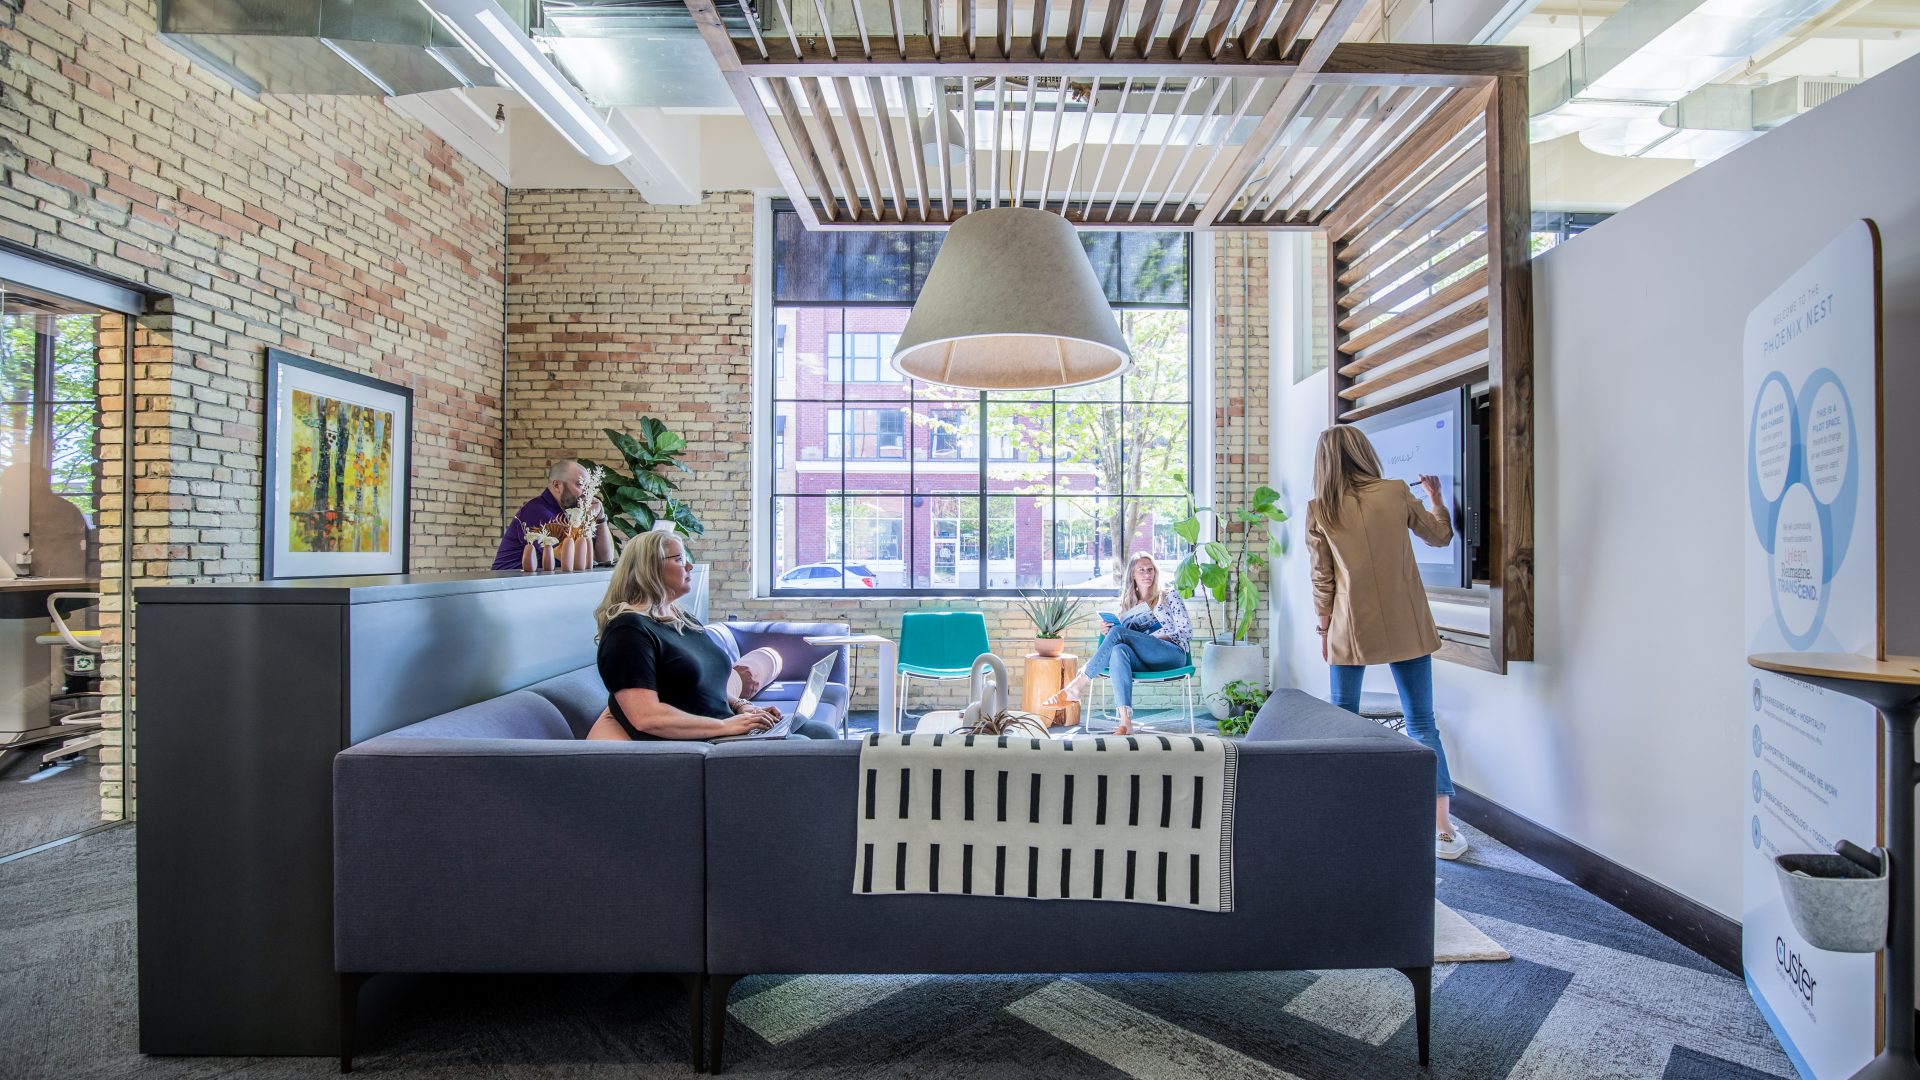 Custer Inc. transforms commercial & corporate workspaces into functional environments to foster cooperation & empower people to be their best. Call us today!